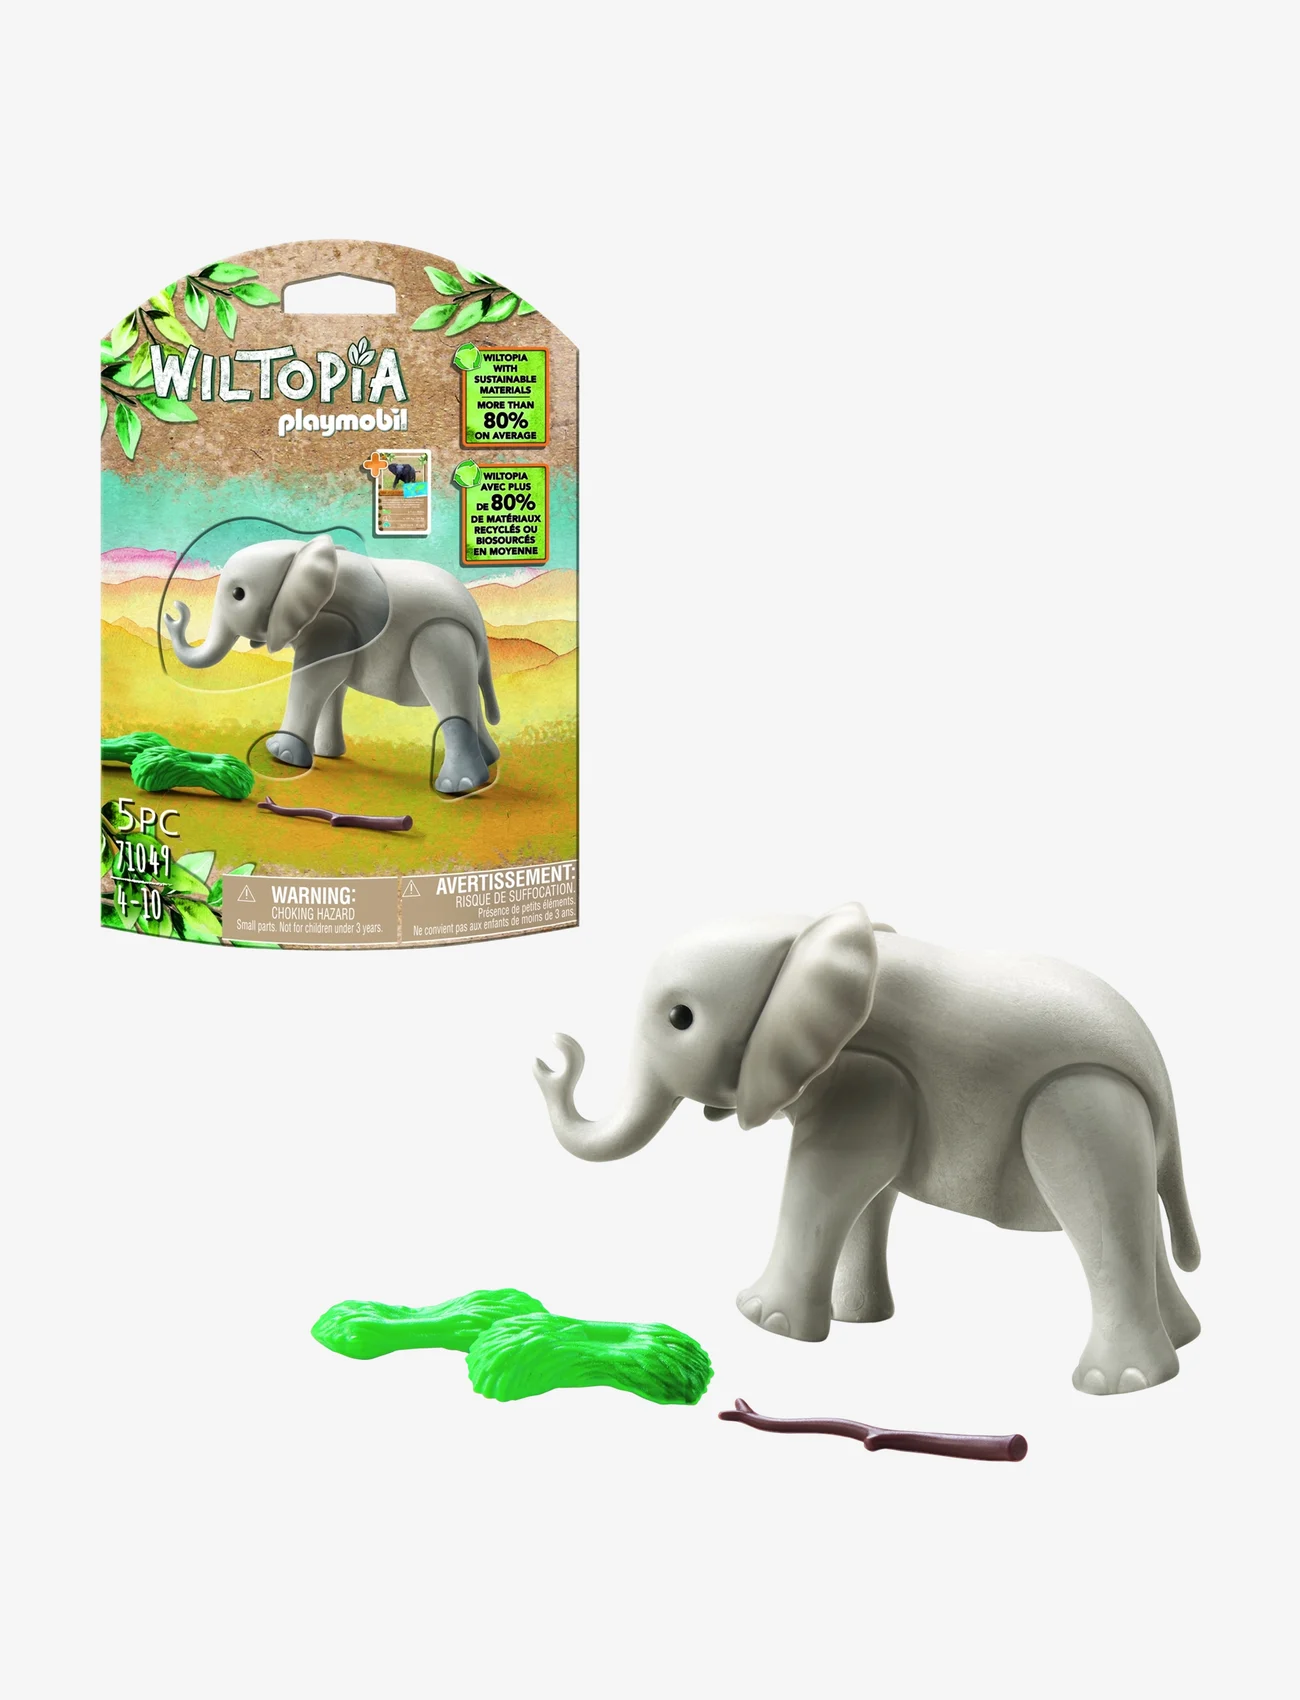 PLAYMOBIL - PLAYMOBIL Wiltopia Young Elephant - 71049 - playmobil wiltopia - multicolored - 1